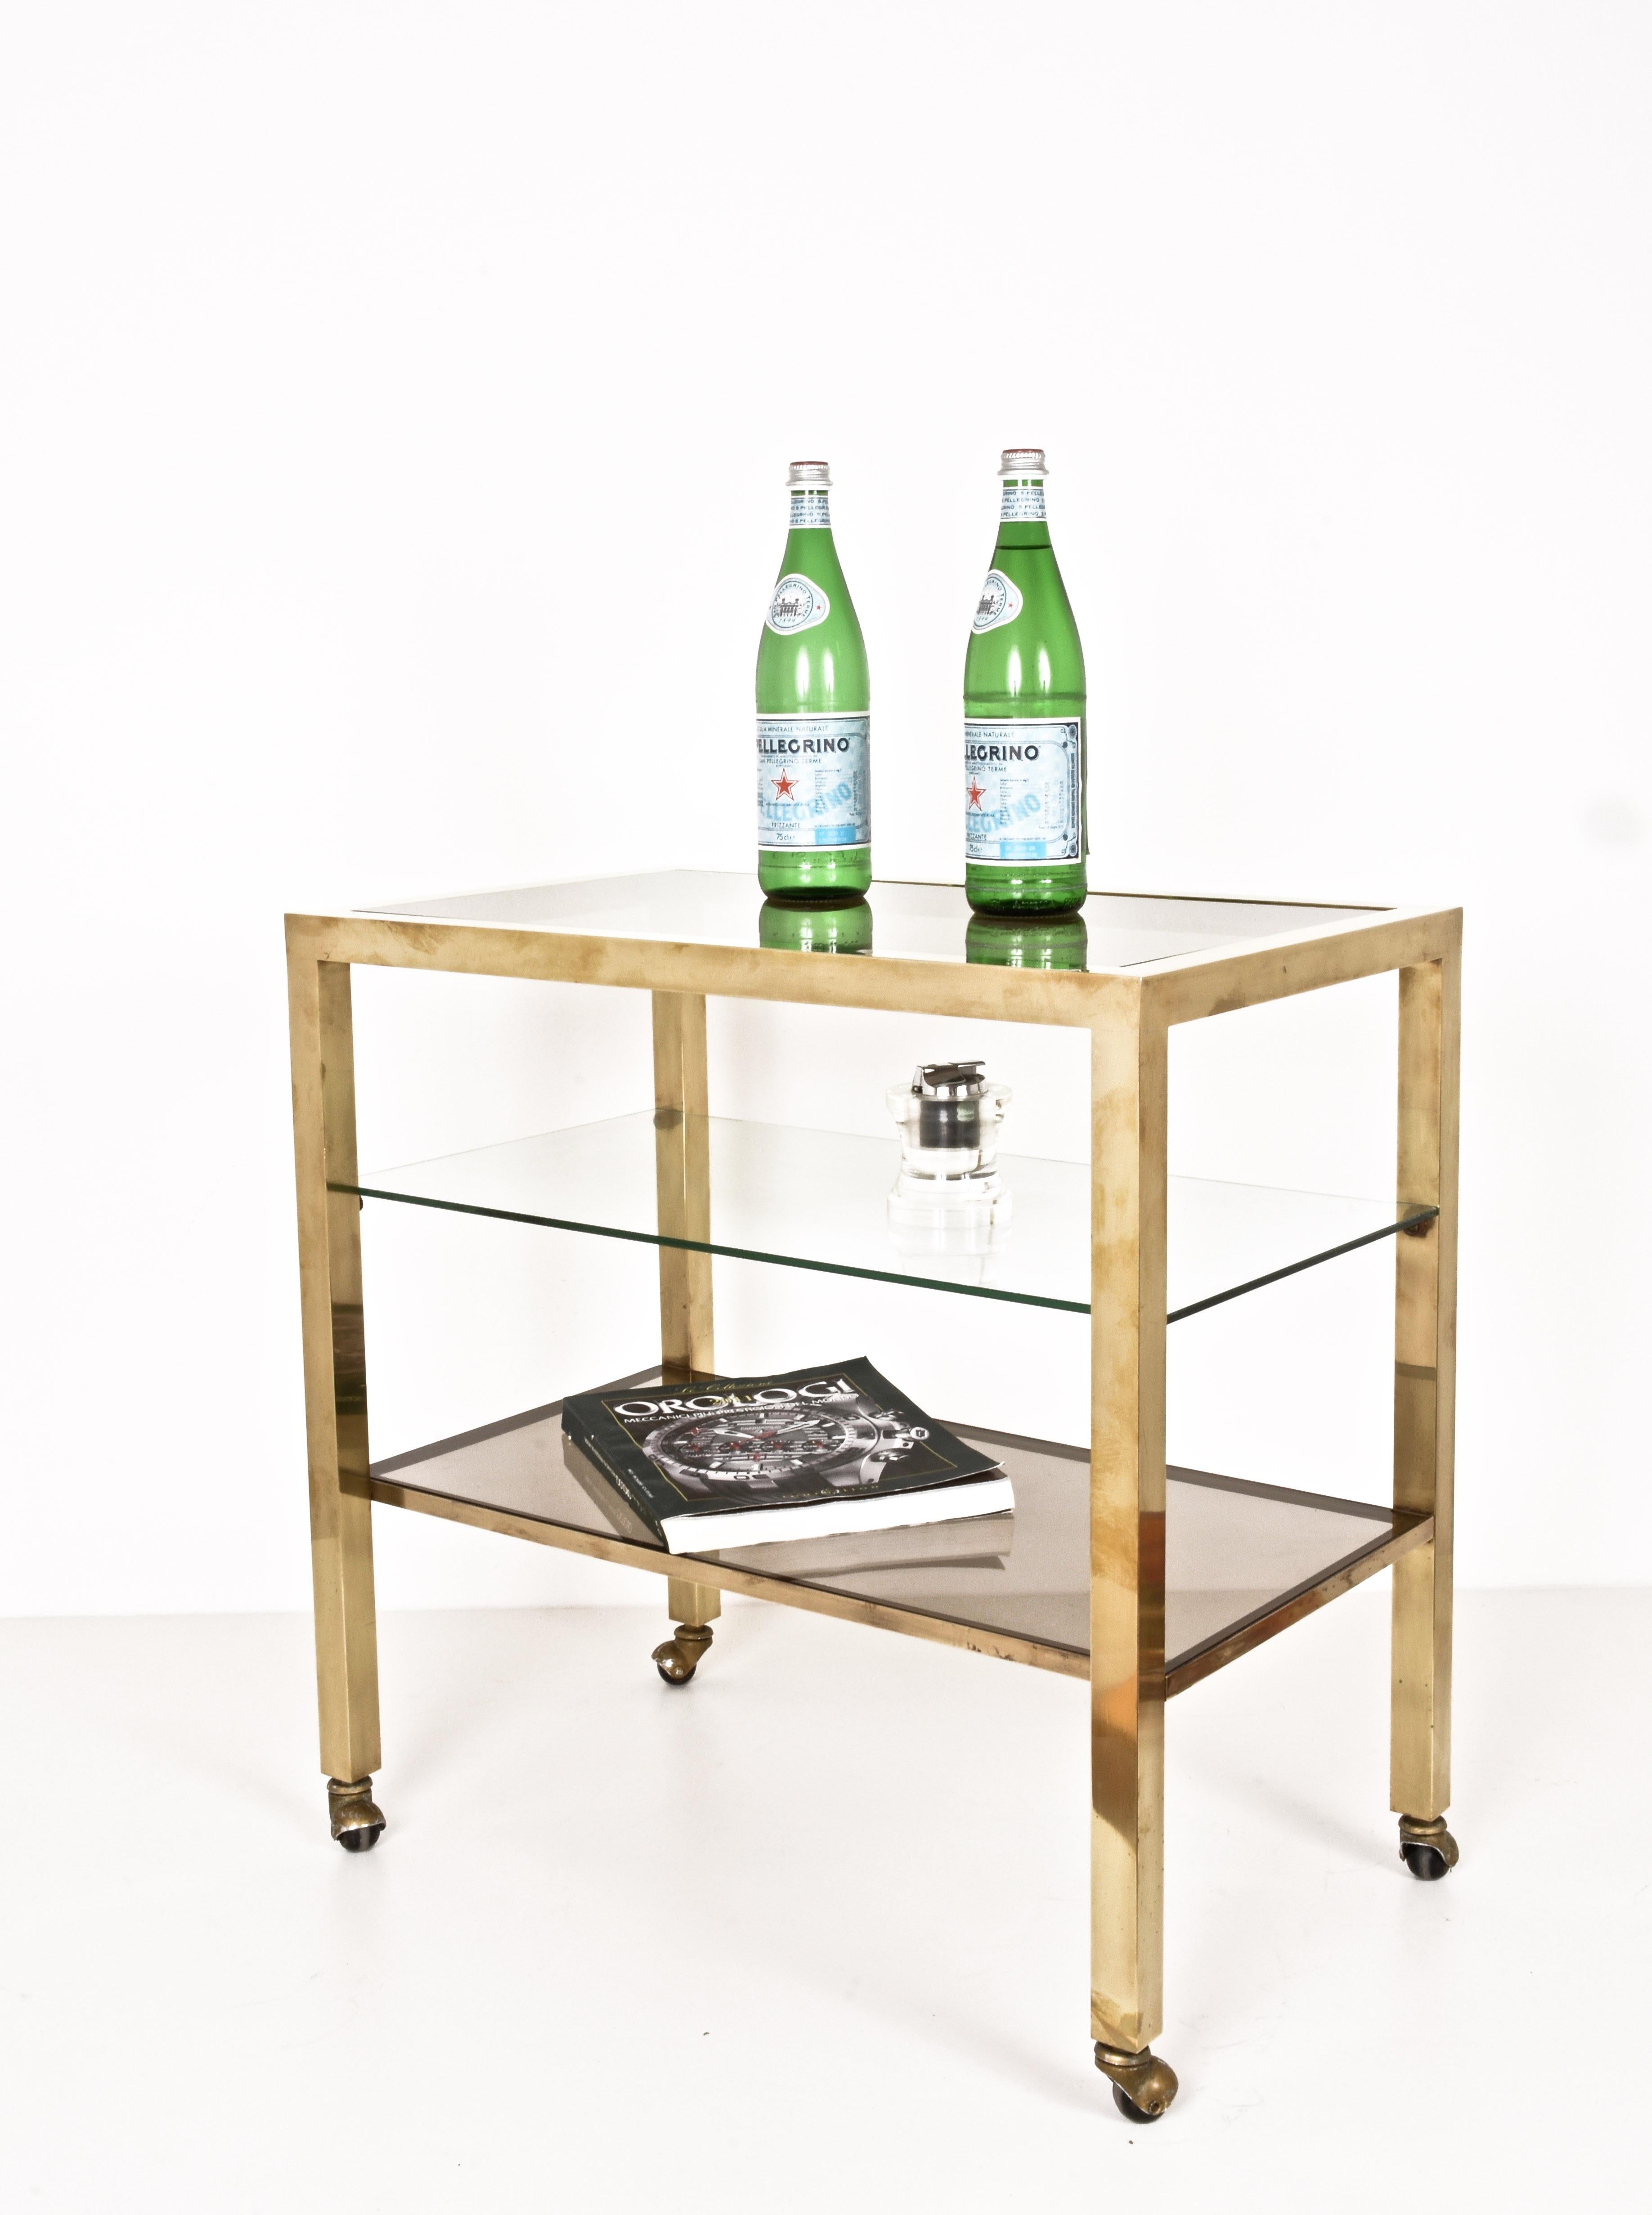 Exceptional three-level service cart from the Italian manufacturer.
 